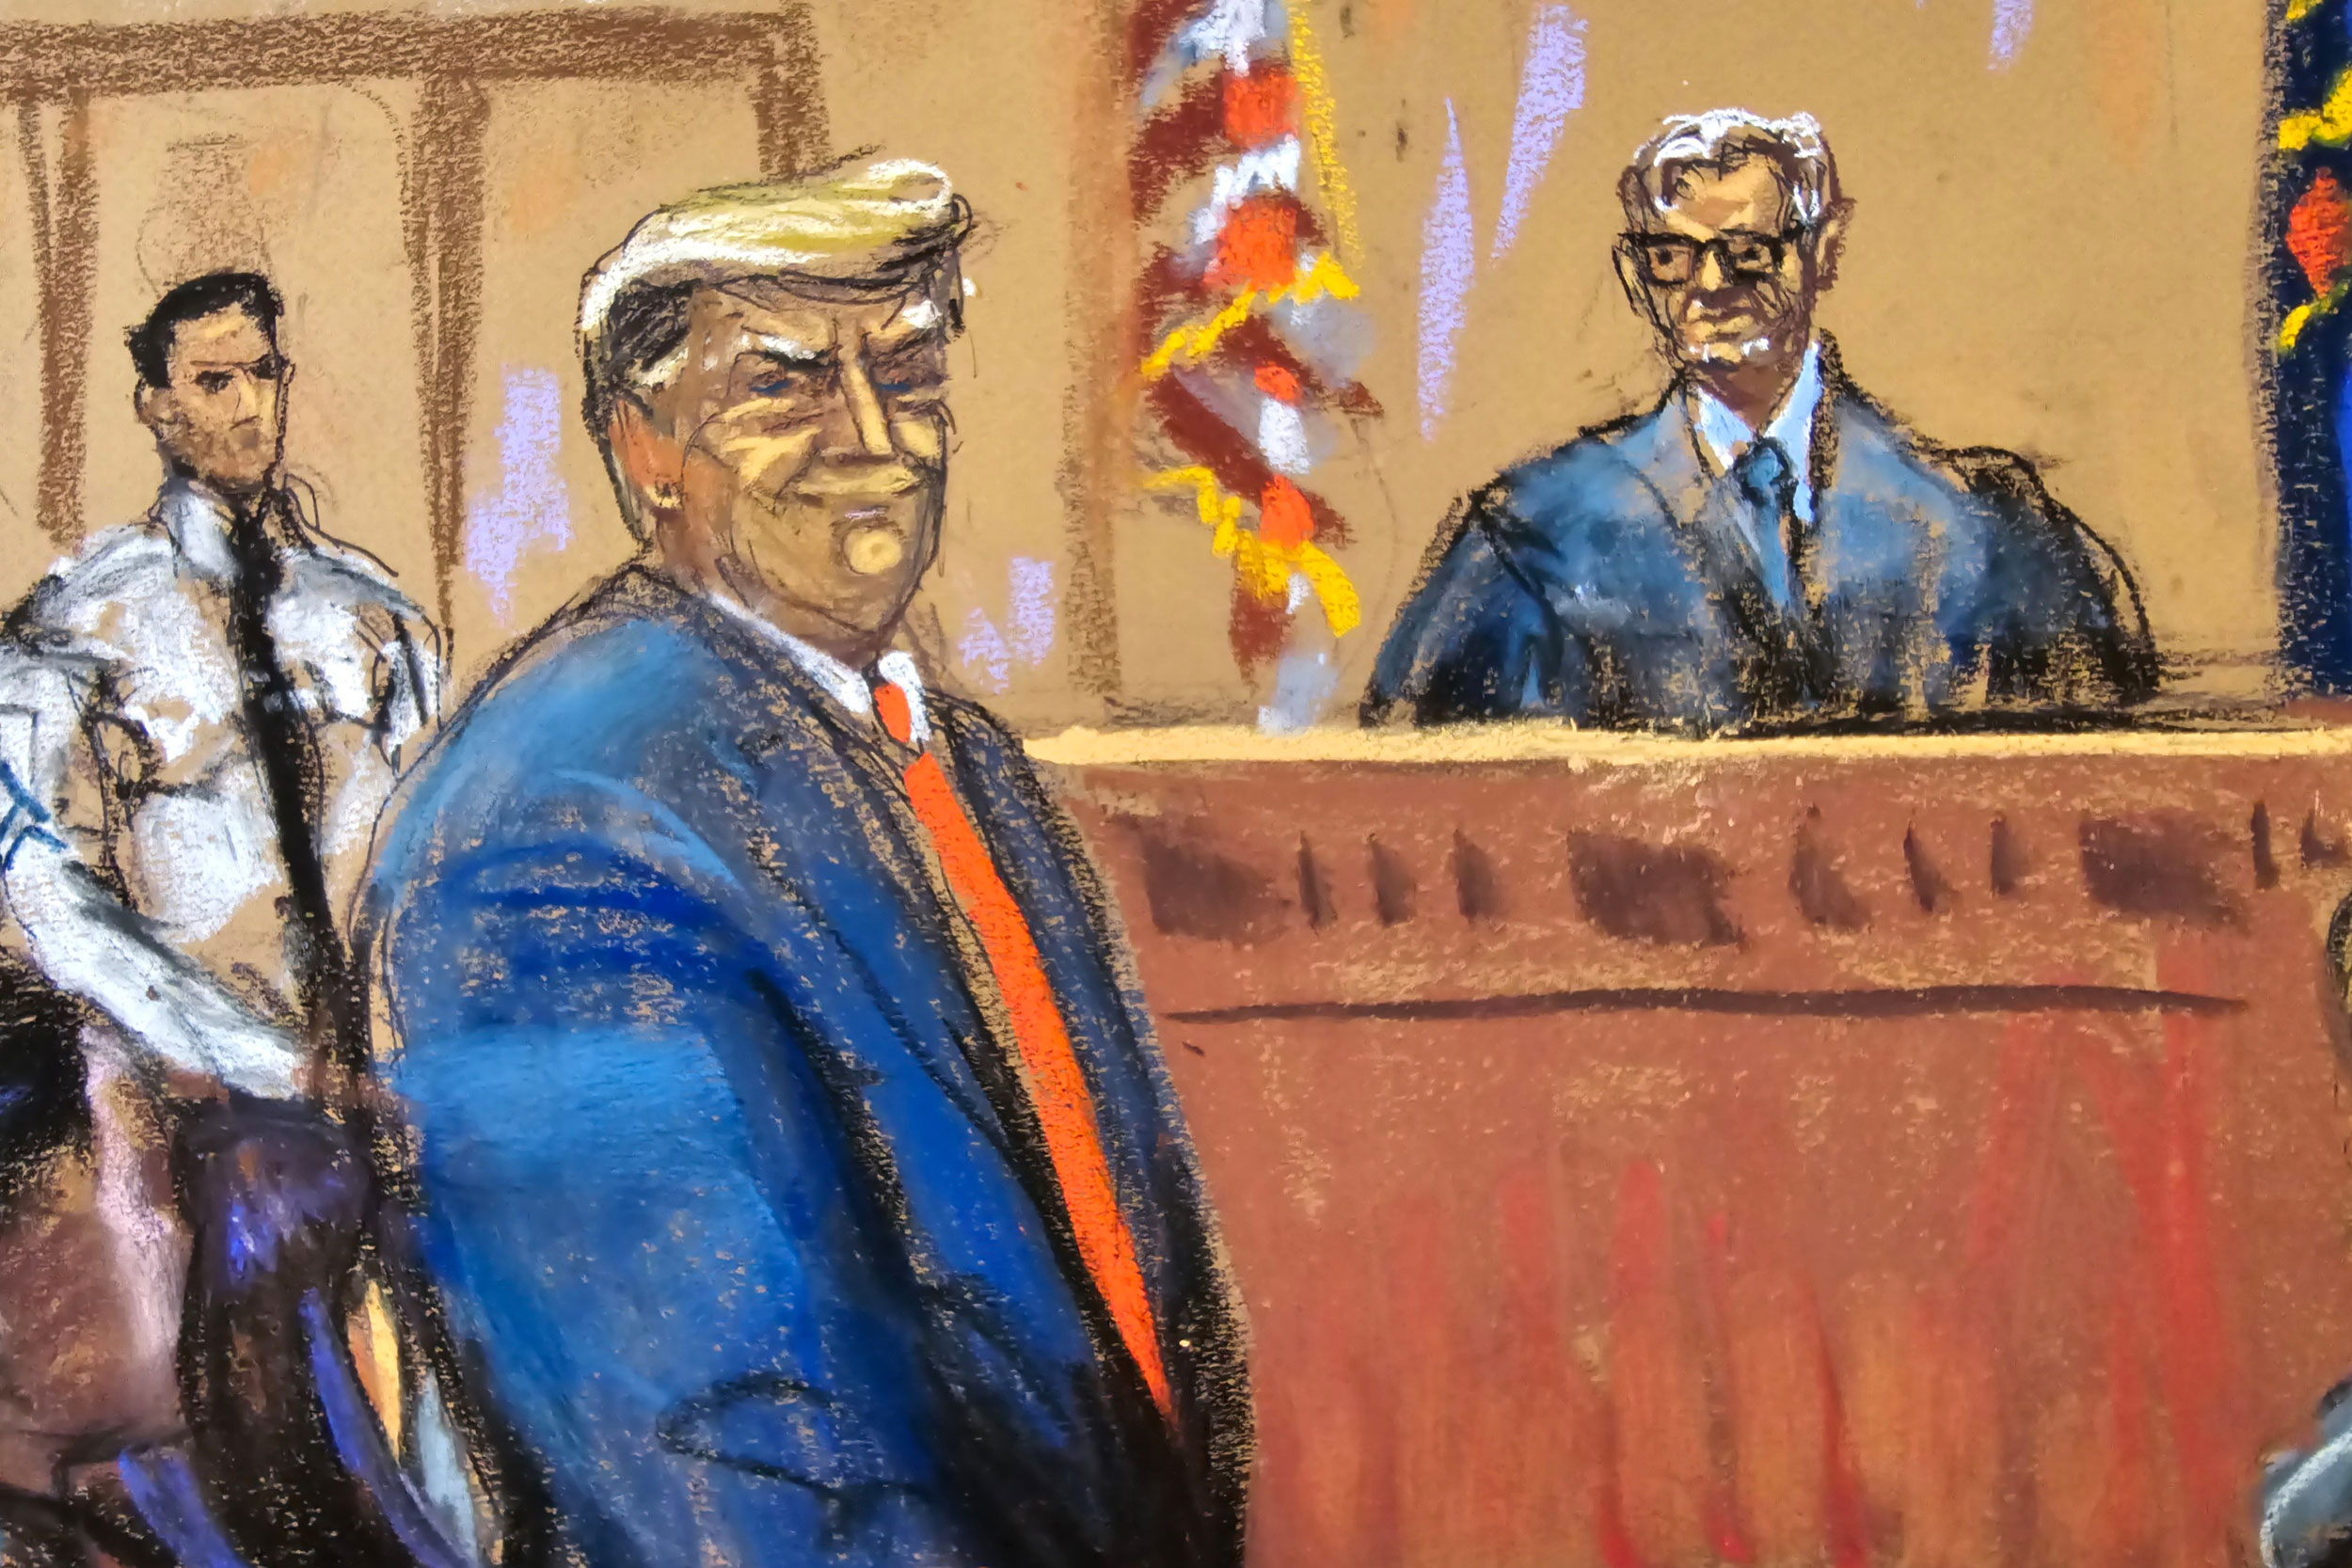 In this court sketch, former President Trump smirks at prospective jurors as he is introduced as the defendant.